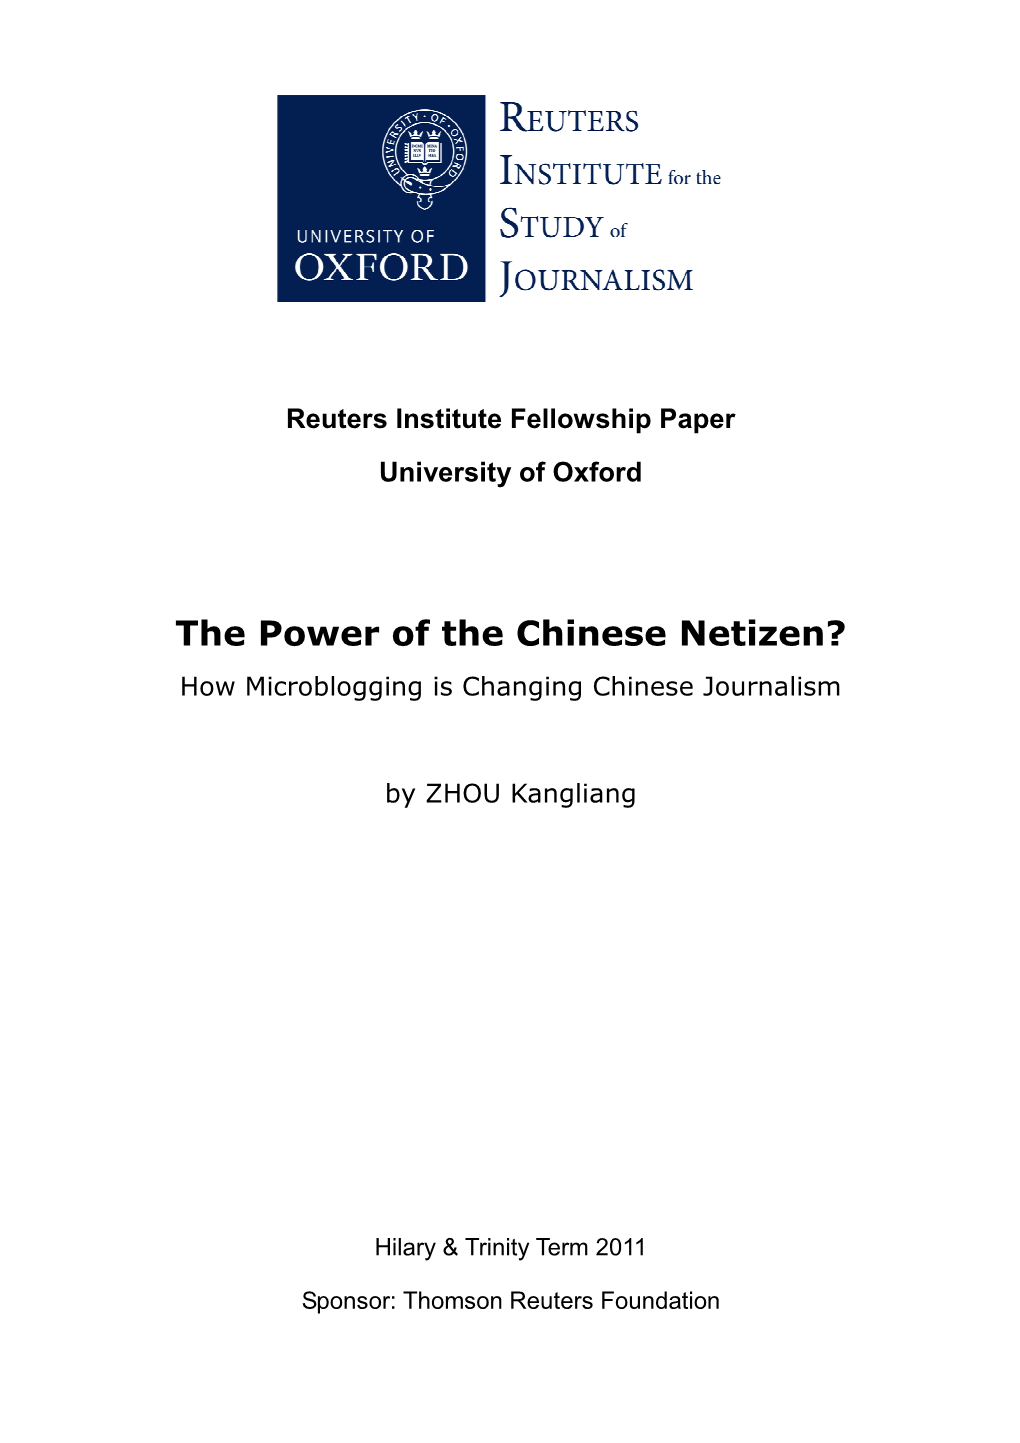 The Power of the Chinese Netizen? How Microblogging Is Changing Chinese Journalism